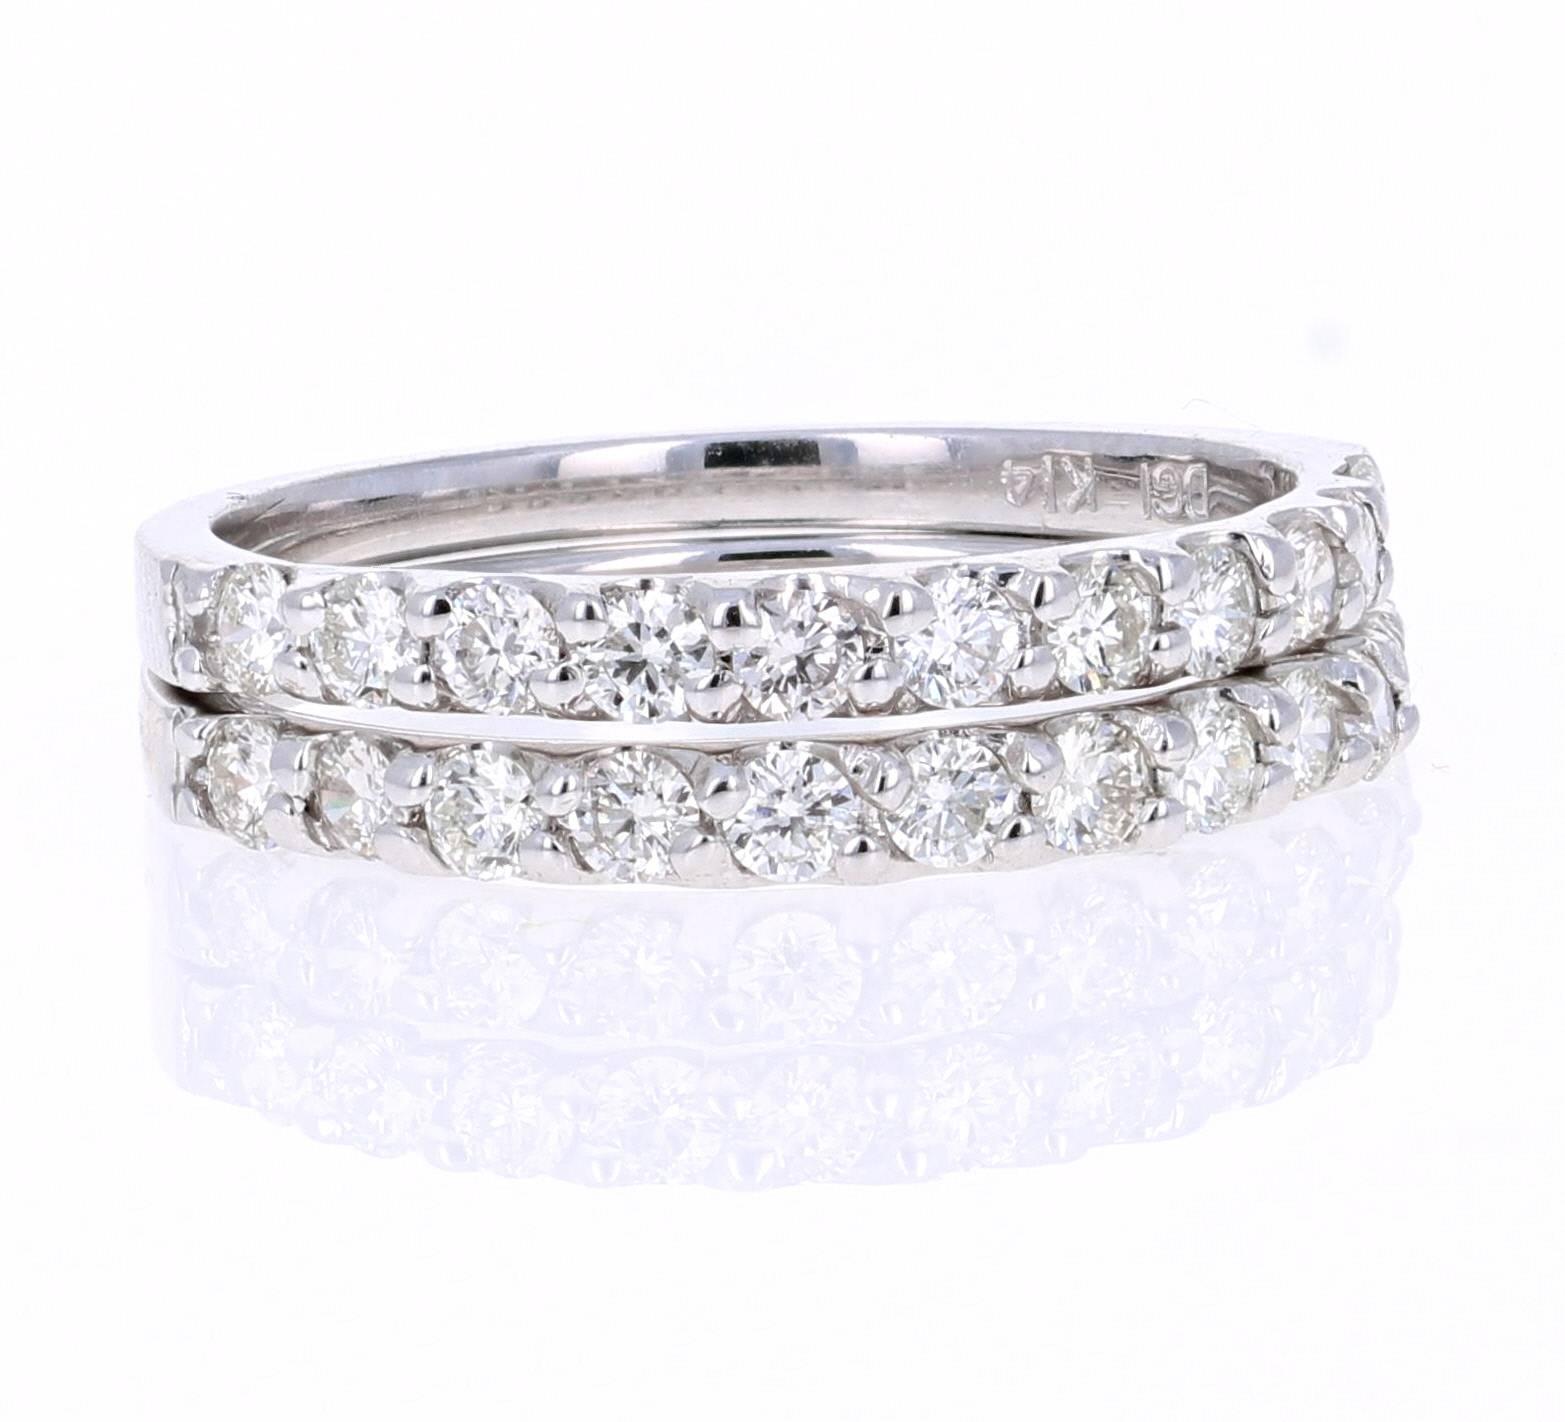 0.86 Carat Round Cut Diamond White Gold Stackable Bands!

Set of 2 elegant and classy 0.86 Carat Diamond bands that are sure to be a great addition to your accessory collection!   There are 11 Round Cut Diamonds that weigh 0.43 carats in each band. 